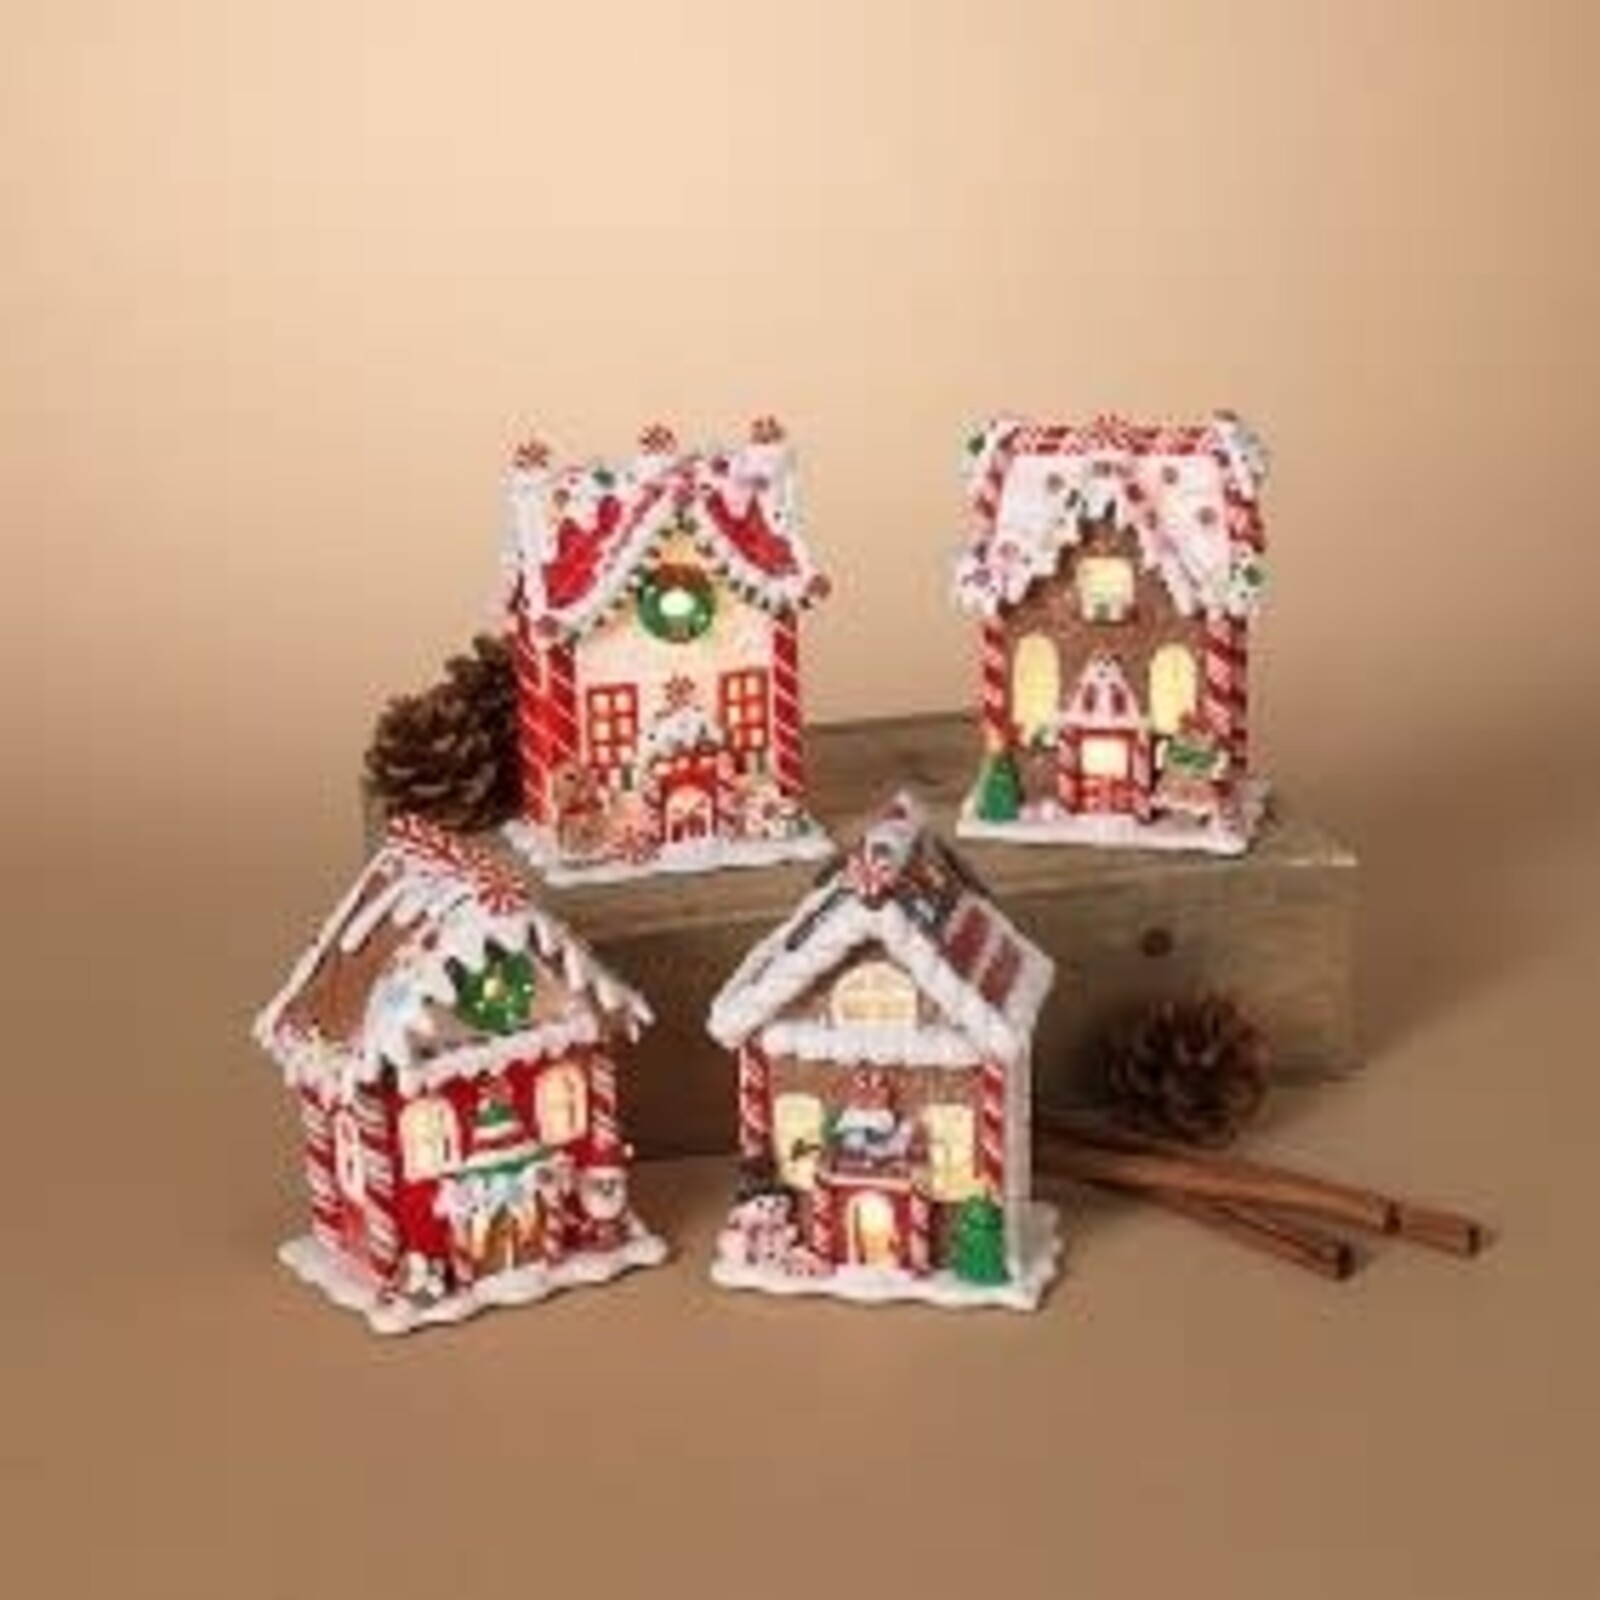 Gerson 5.5" Lighted Clay Dough House    2599290 loading=